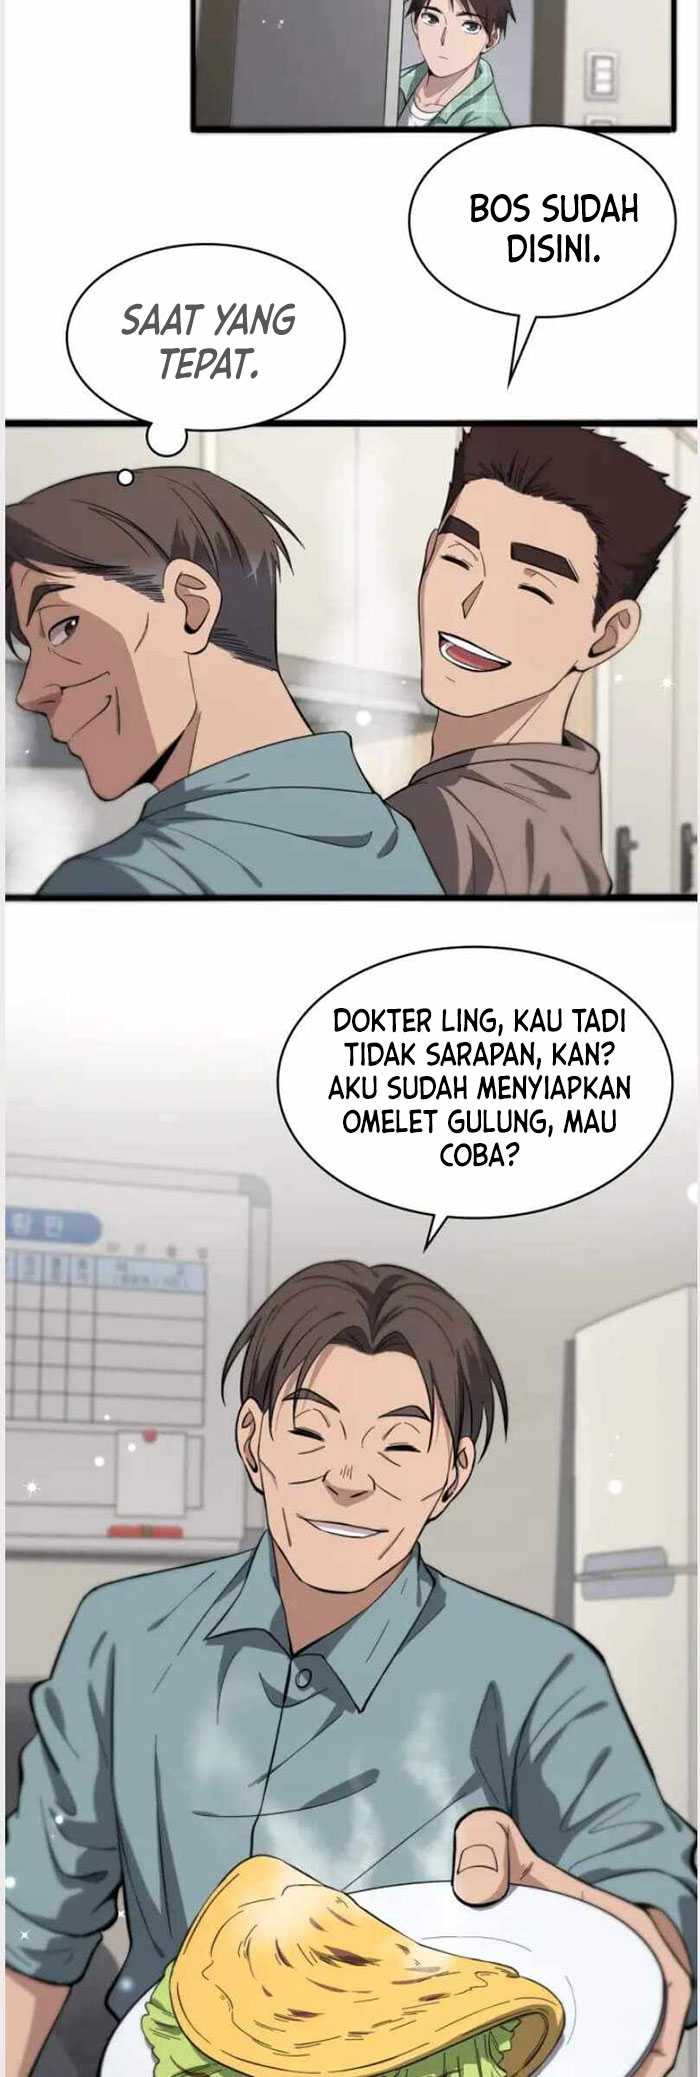 Great Doctor Ling Ran Chapter 122